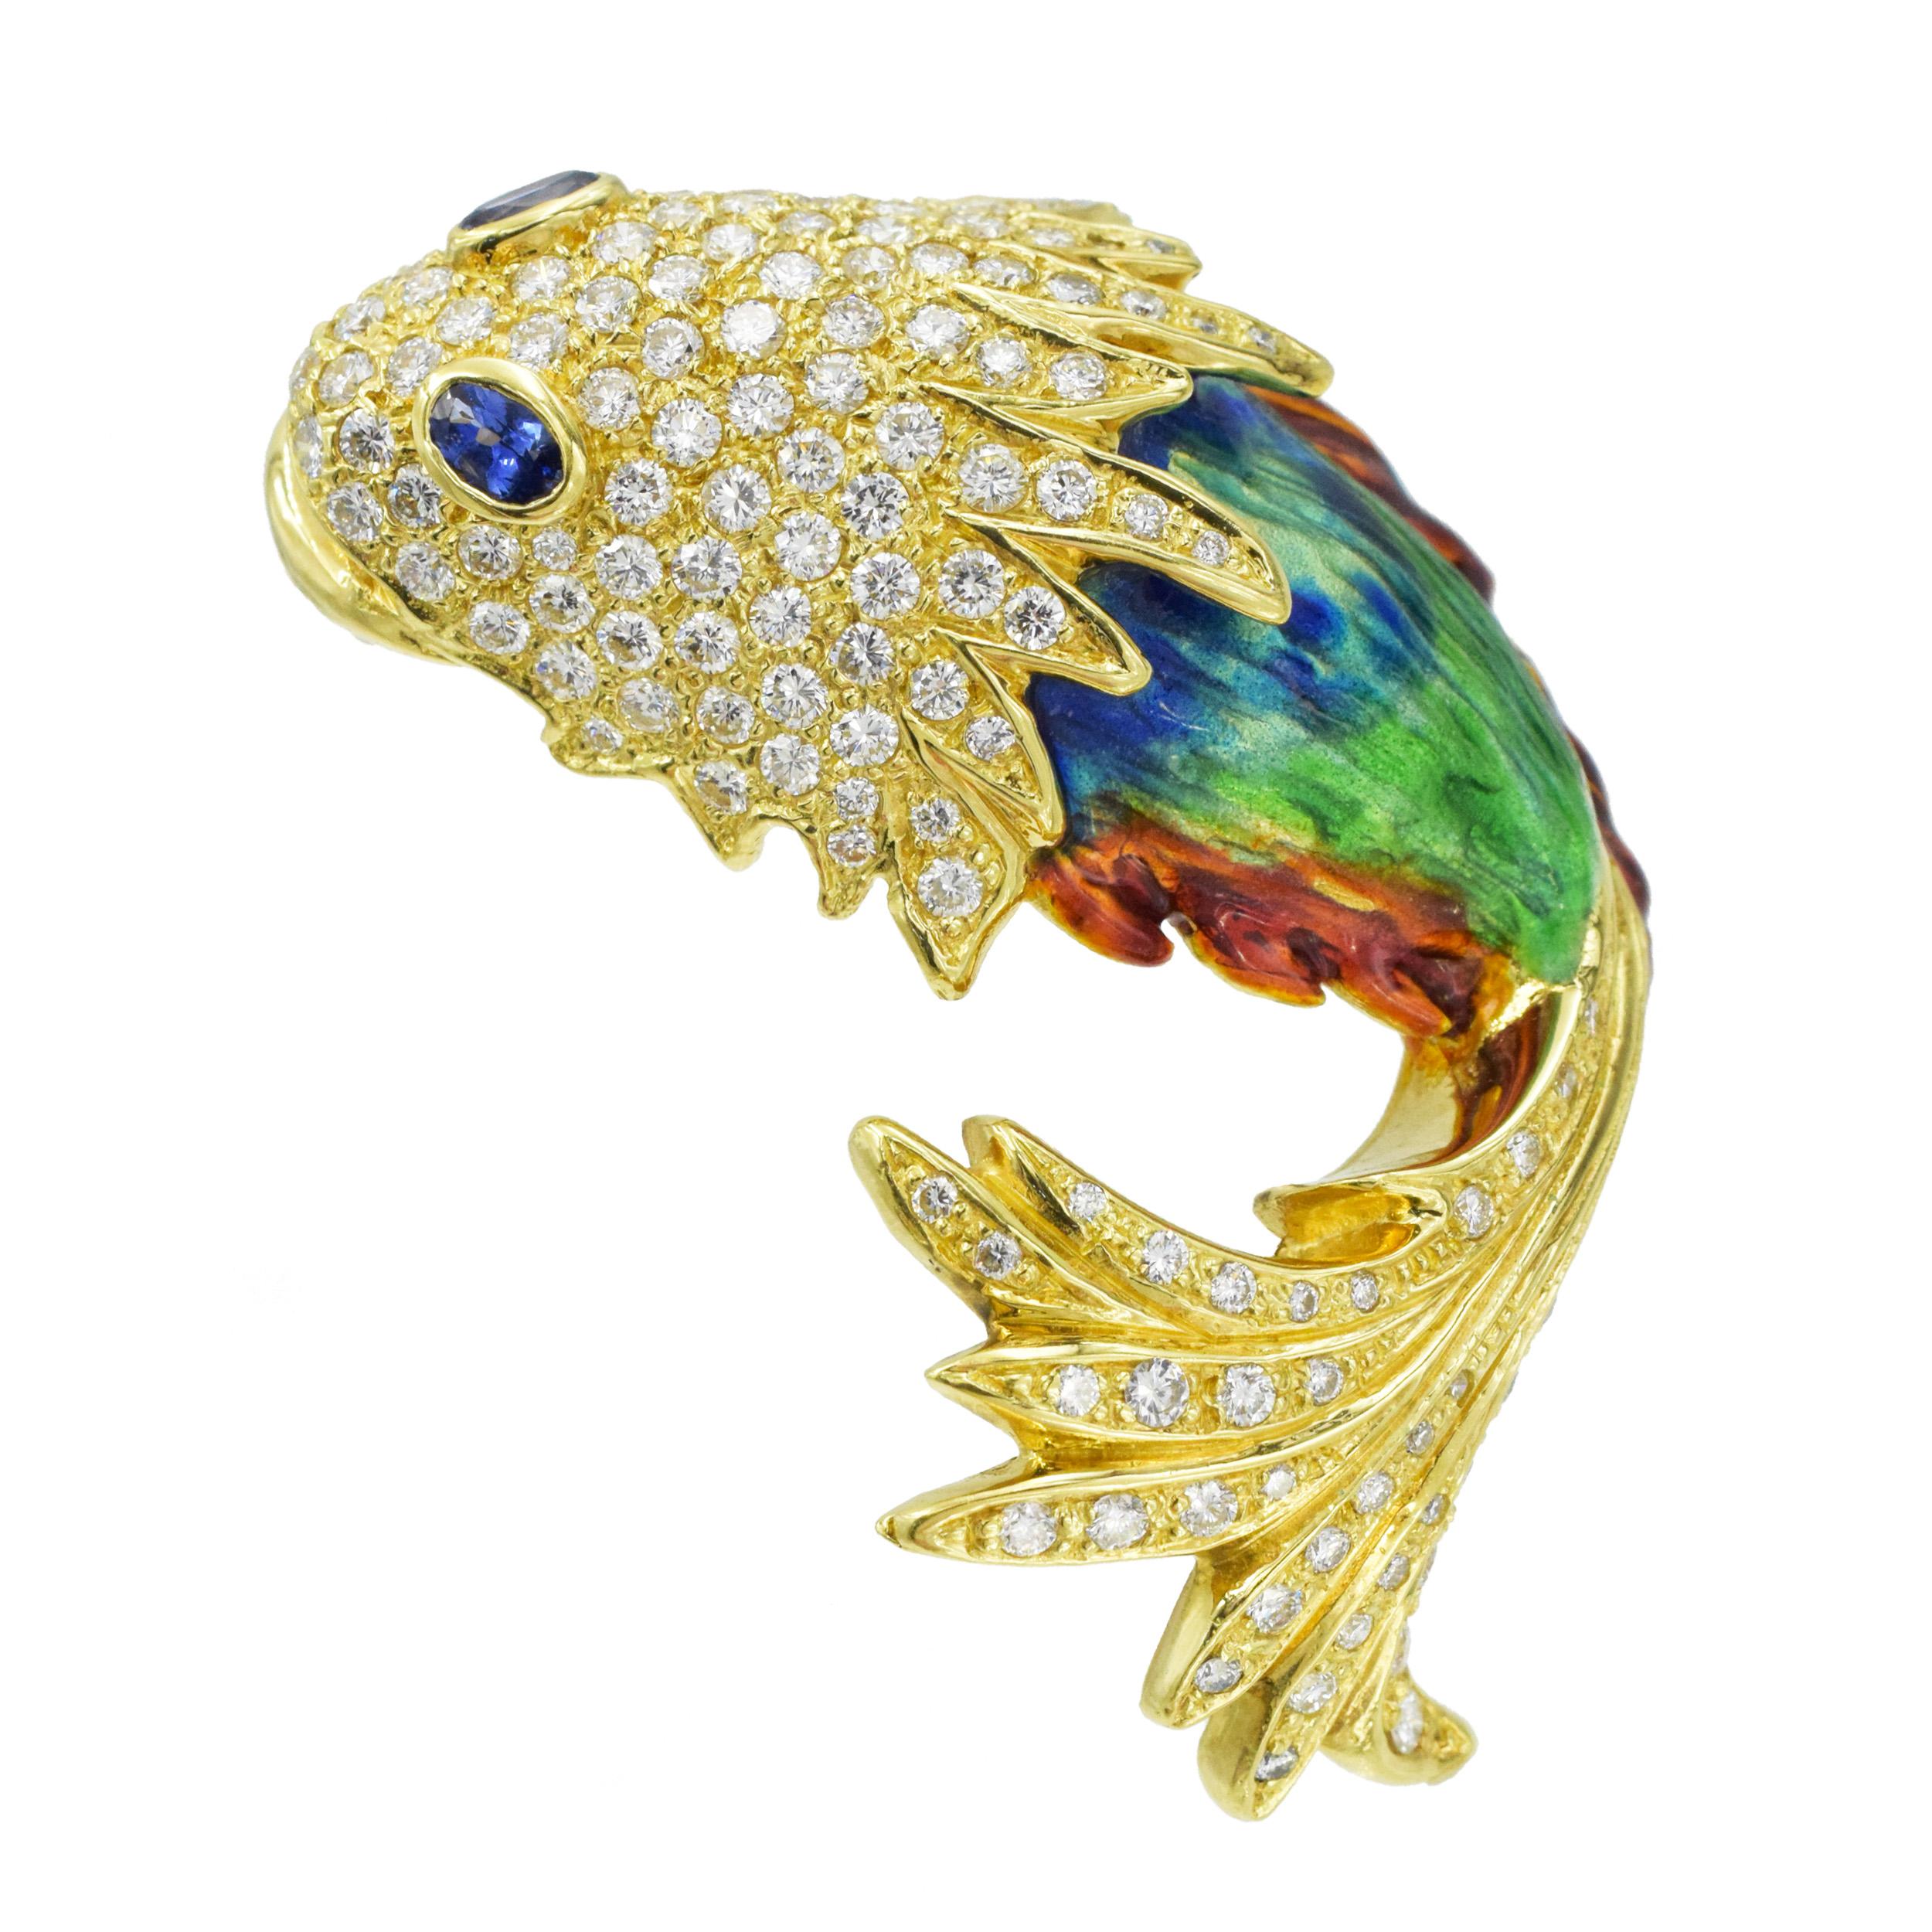 Aldo Cipullo for Cartier Sapphire, Diamond and colorful fish brooch crafted in 18k yellow gold. The brooch is designed as a fish with its head and tail encrusted with pave set round brilliant
cut diamonds with total weight of approximately 5.65ct,